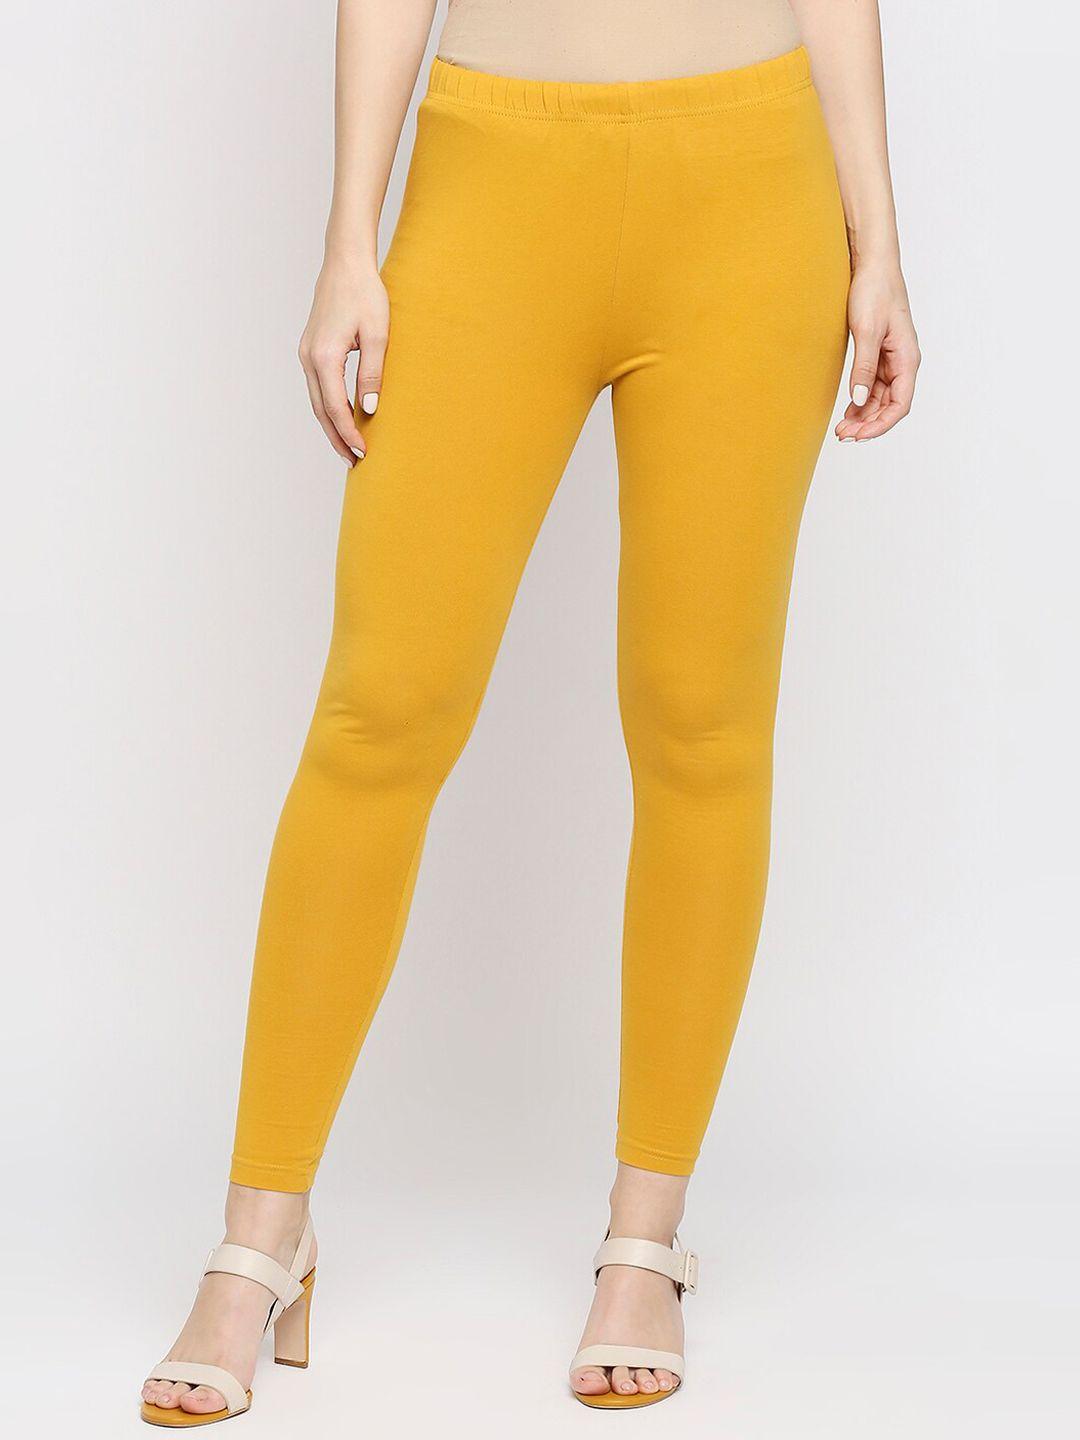 ethnicity women yellow solid cotton ankle length leggings